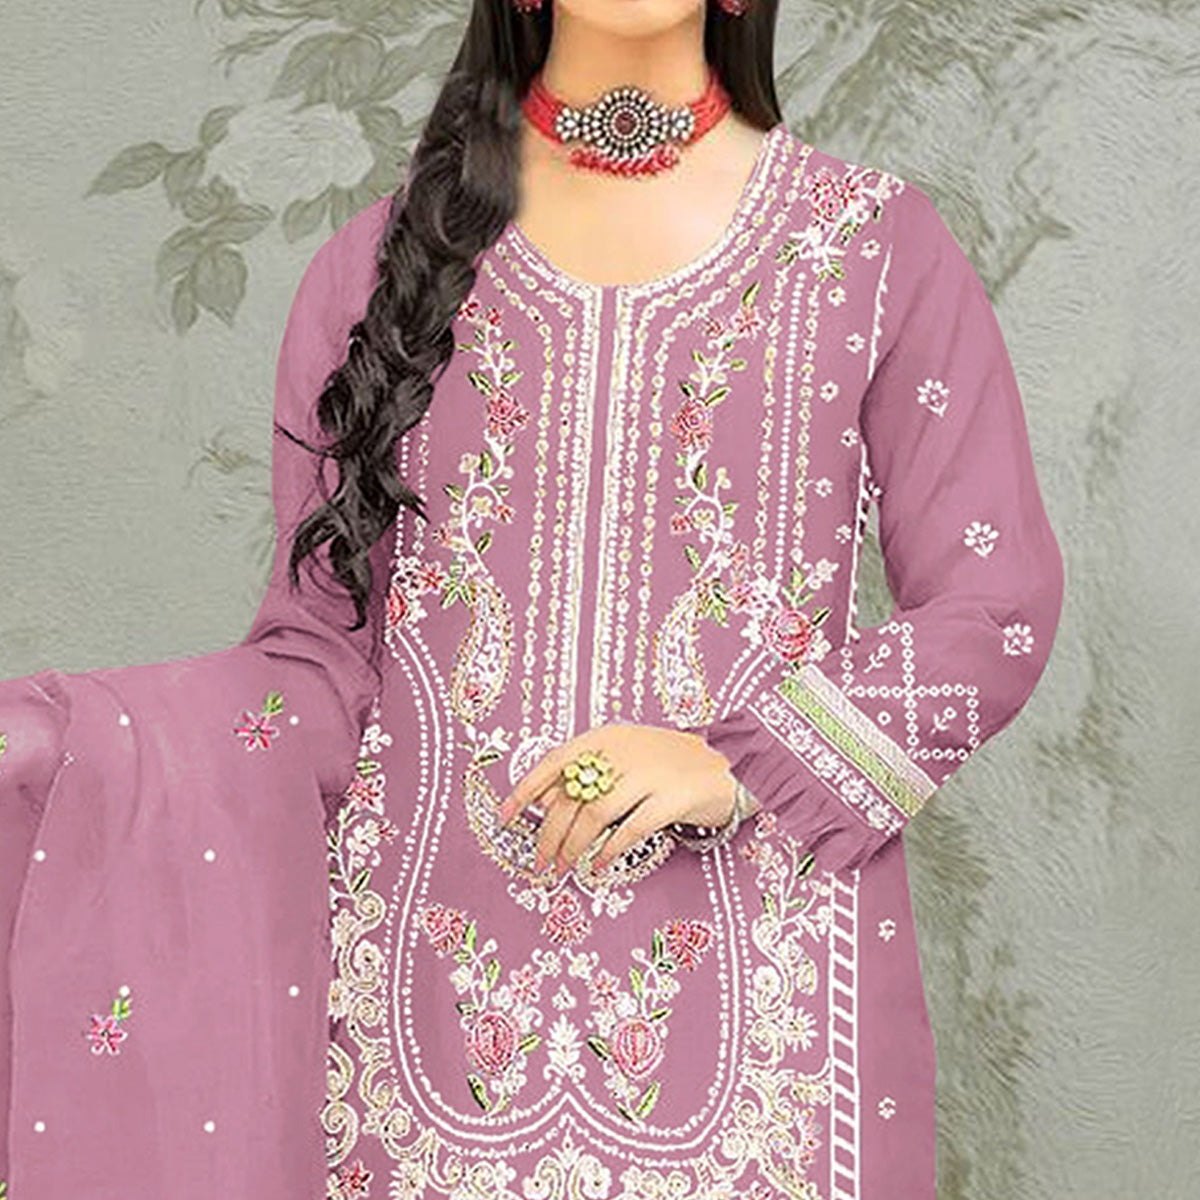 Pink Floral Embroidered Organza Semi Stitched Pakistani Suit